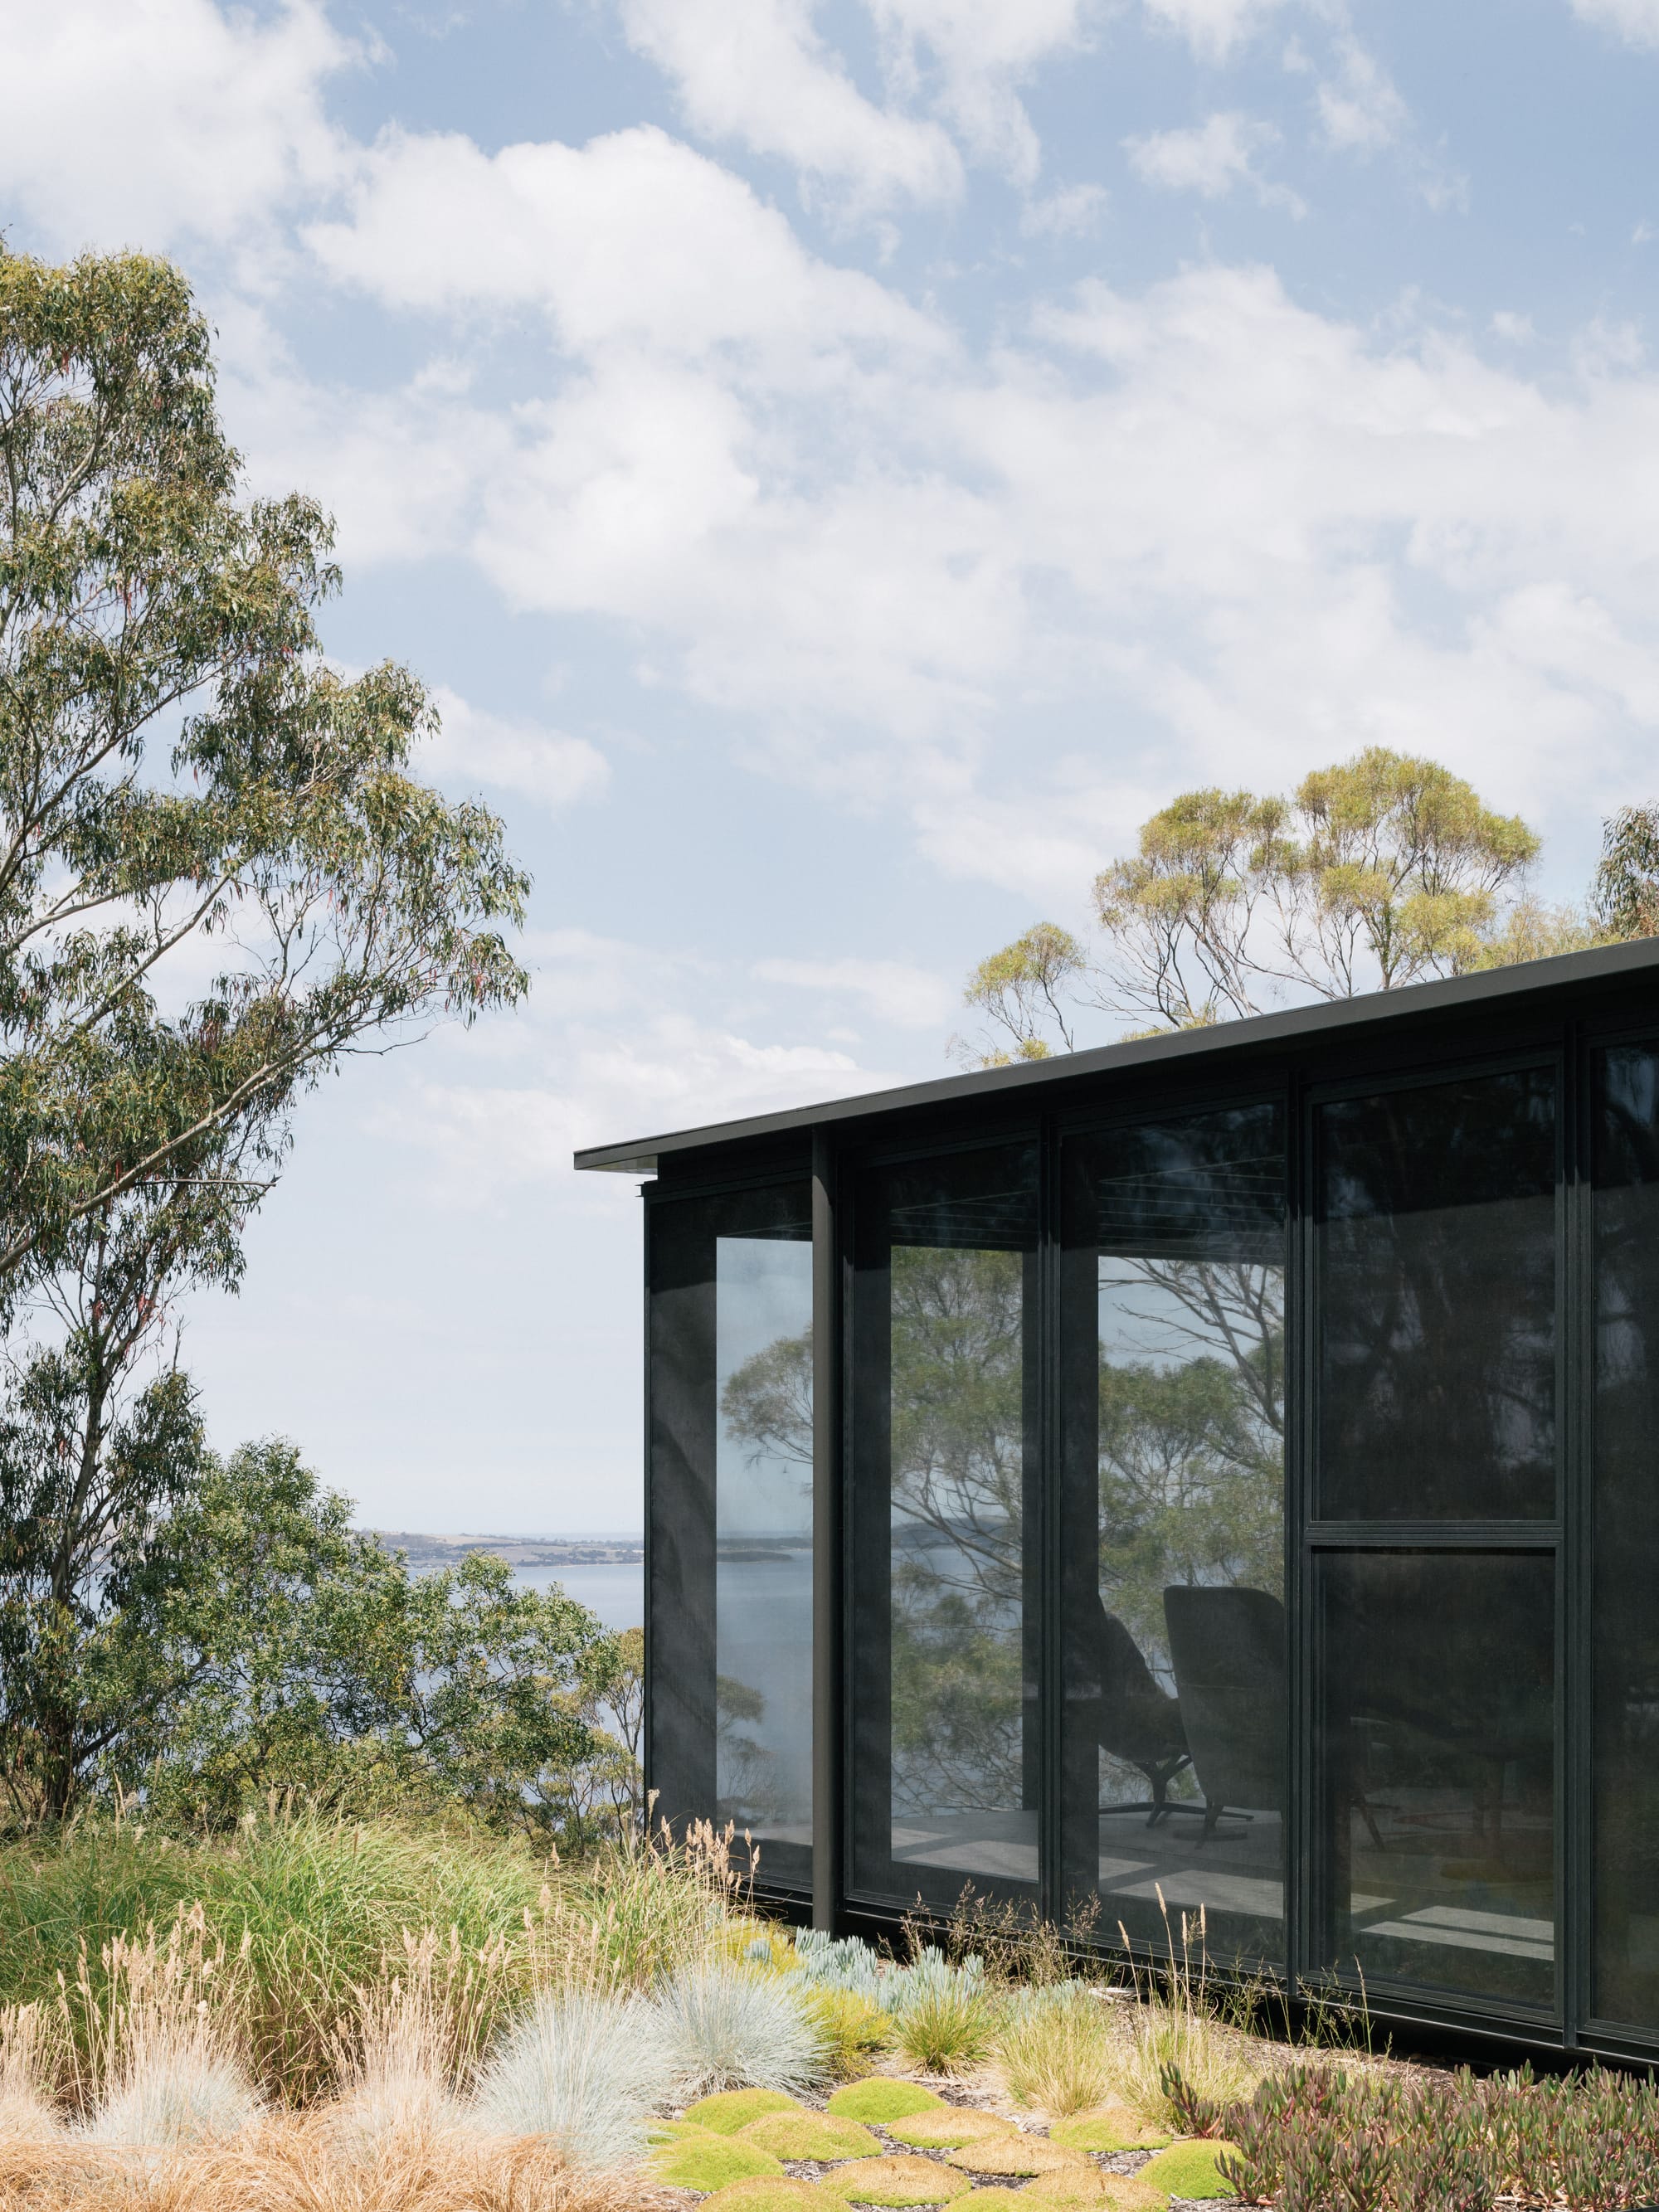 Taroona House by Archier. Photography by Thurston Empson. Black and glass living space surrounded by native plant life and overlooking water.